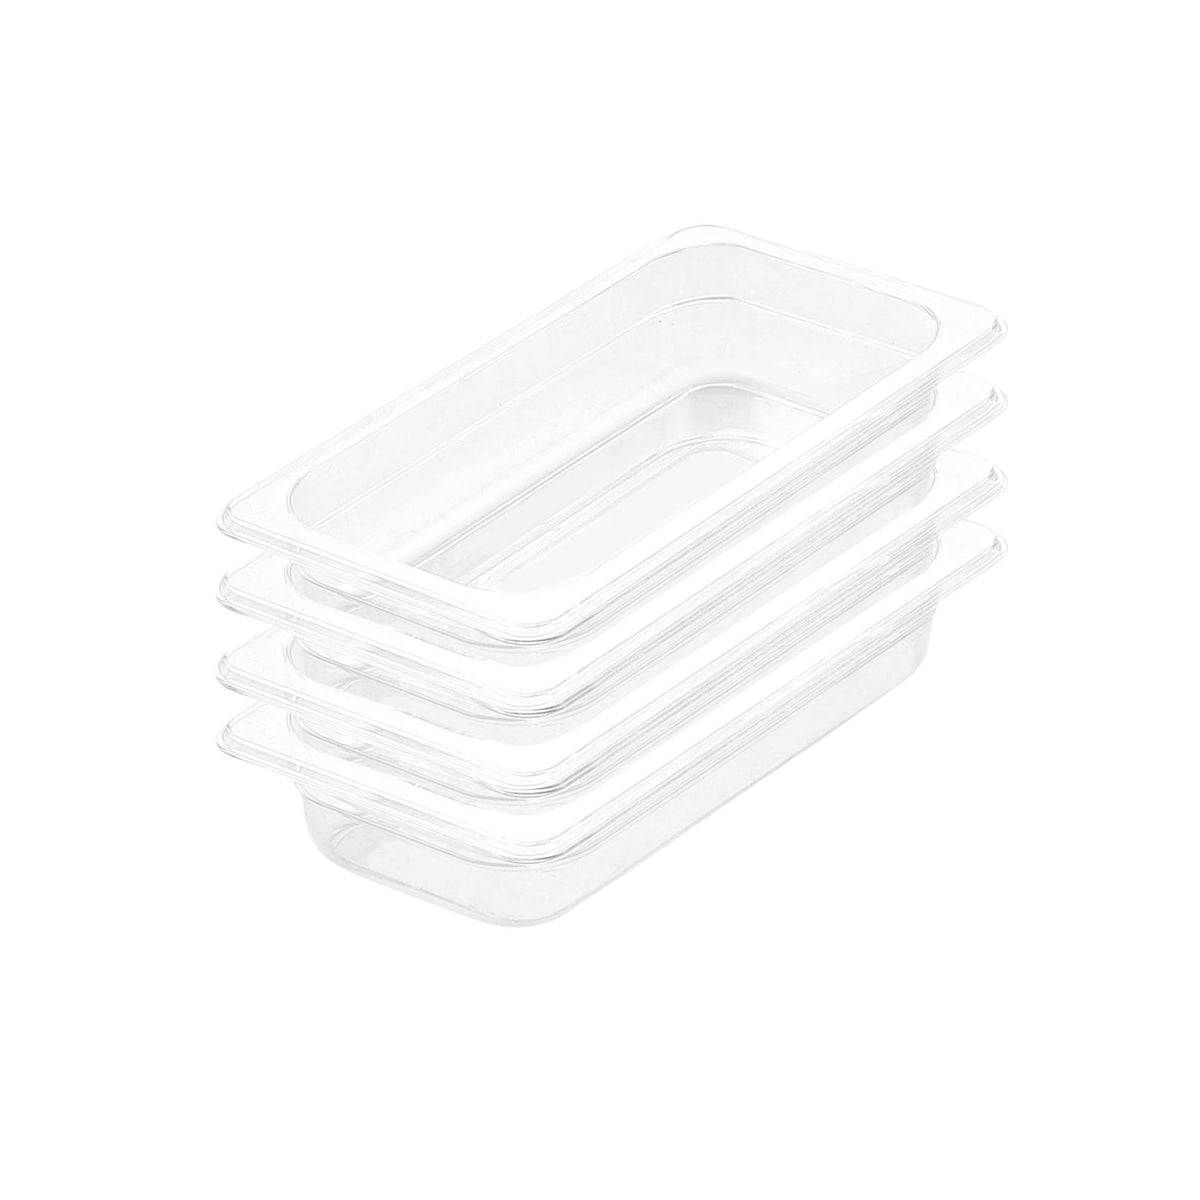 SOGA 65mm Clear Gastronorm GN Pan 1/3 Food Tray Storage Bundle of 4